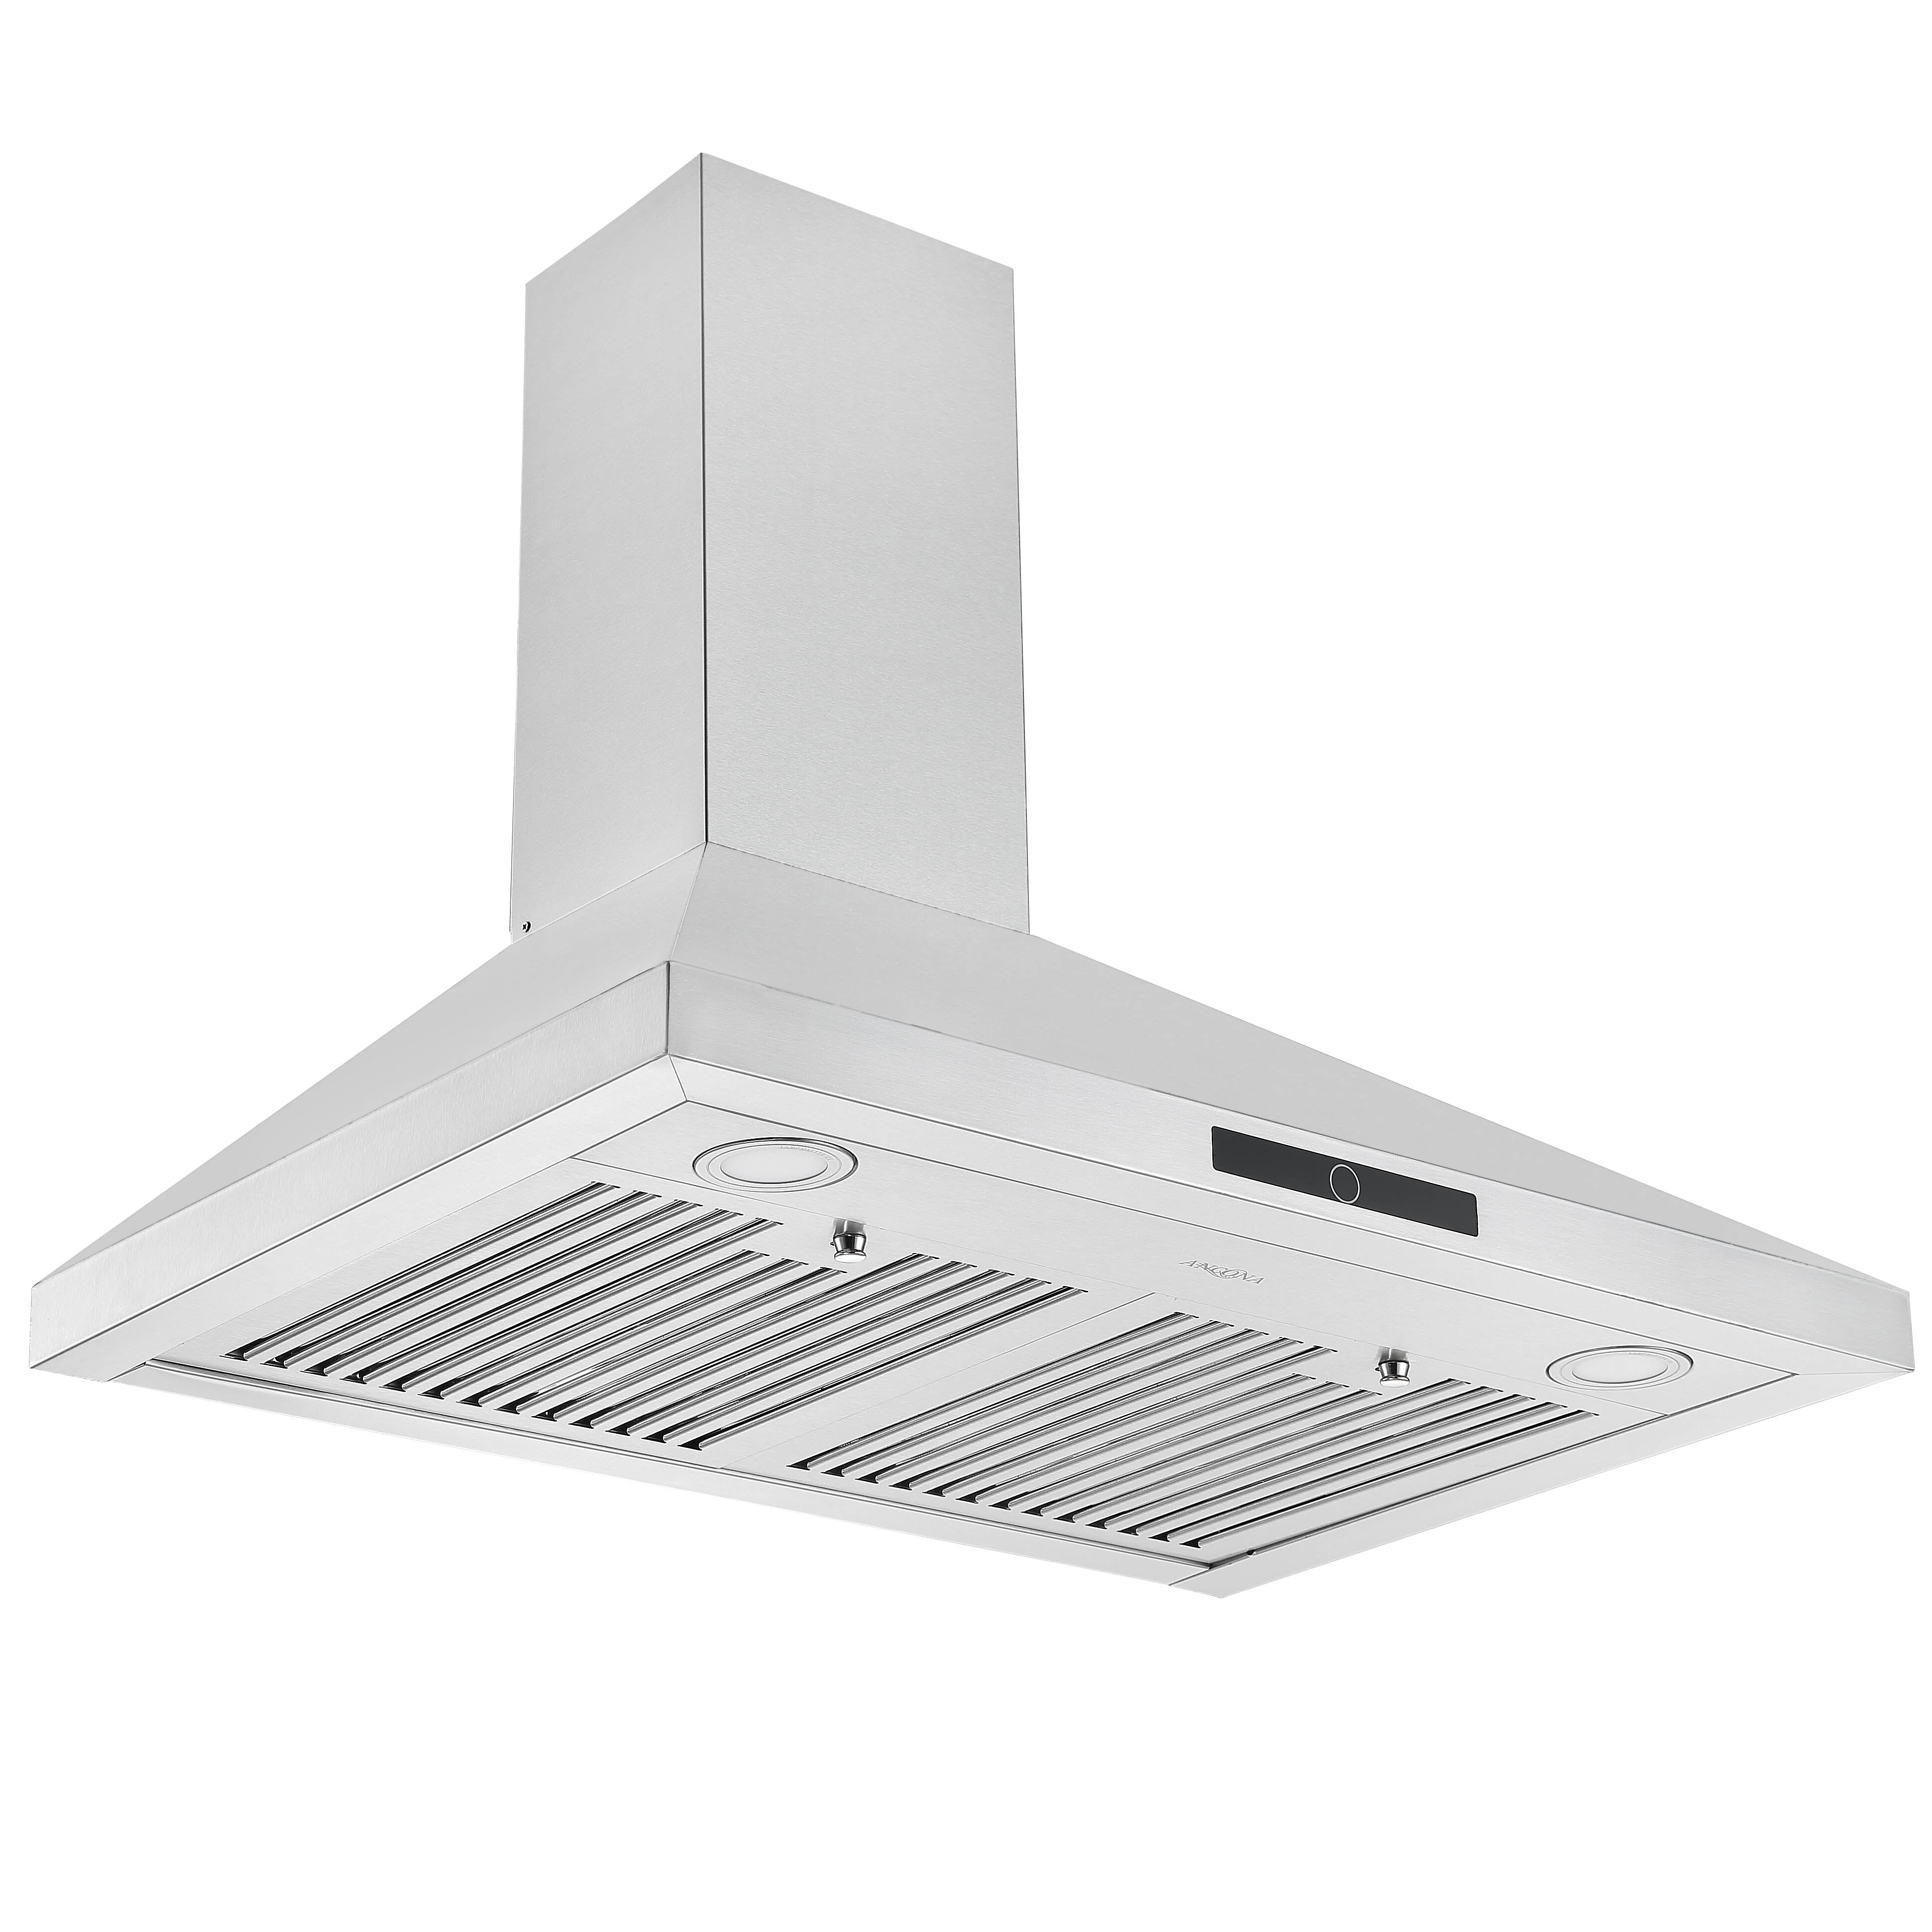 Ancona AN-1542 30 in. Stainless Steel Convertible Wall-Mounted Pyramid Range Hood